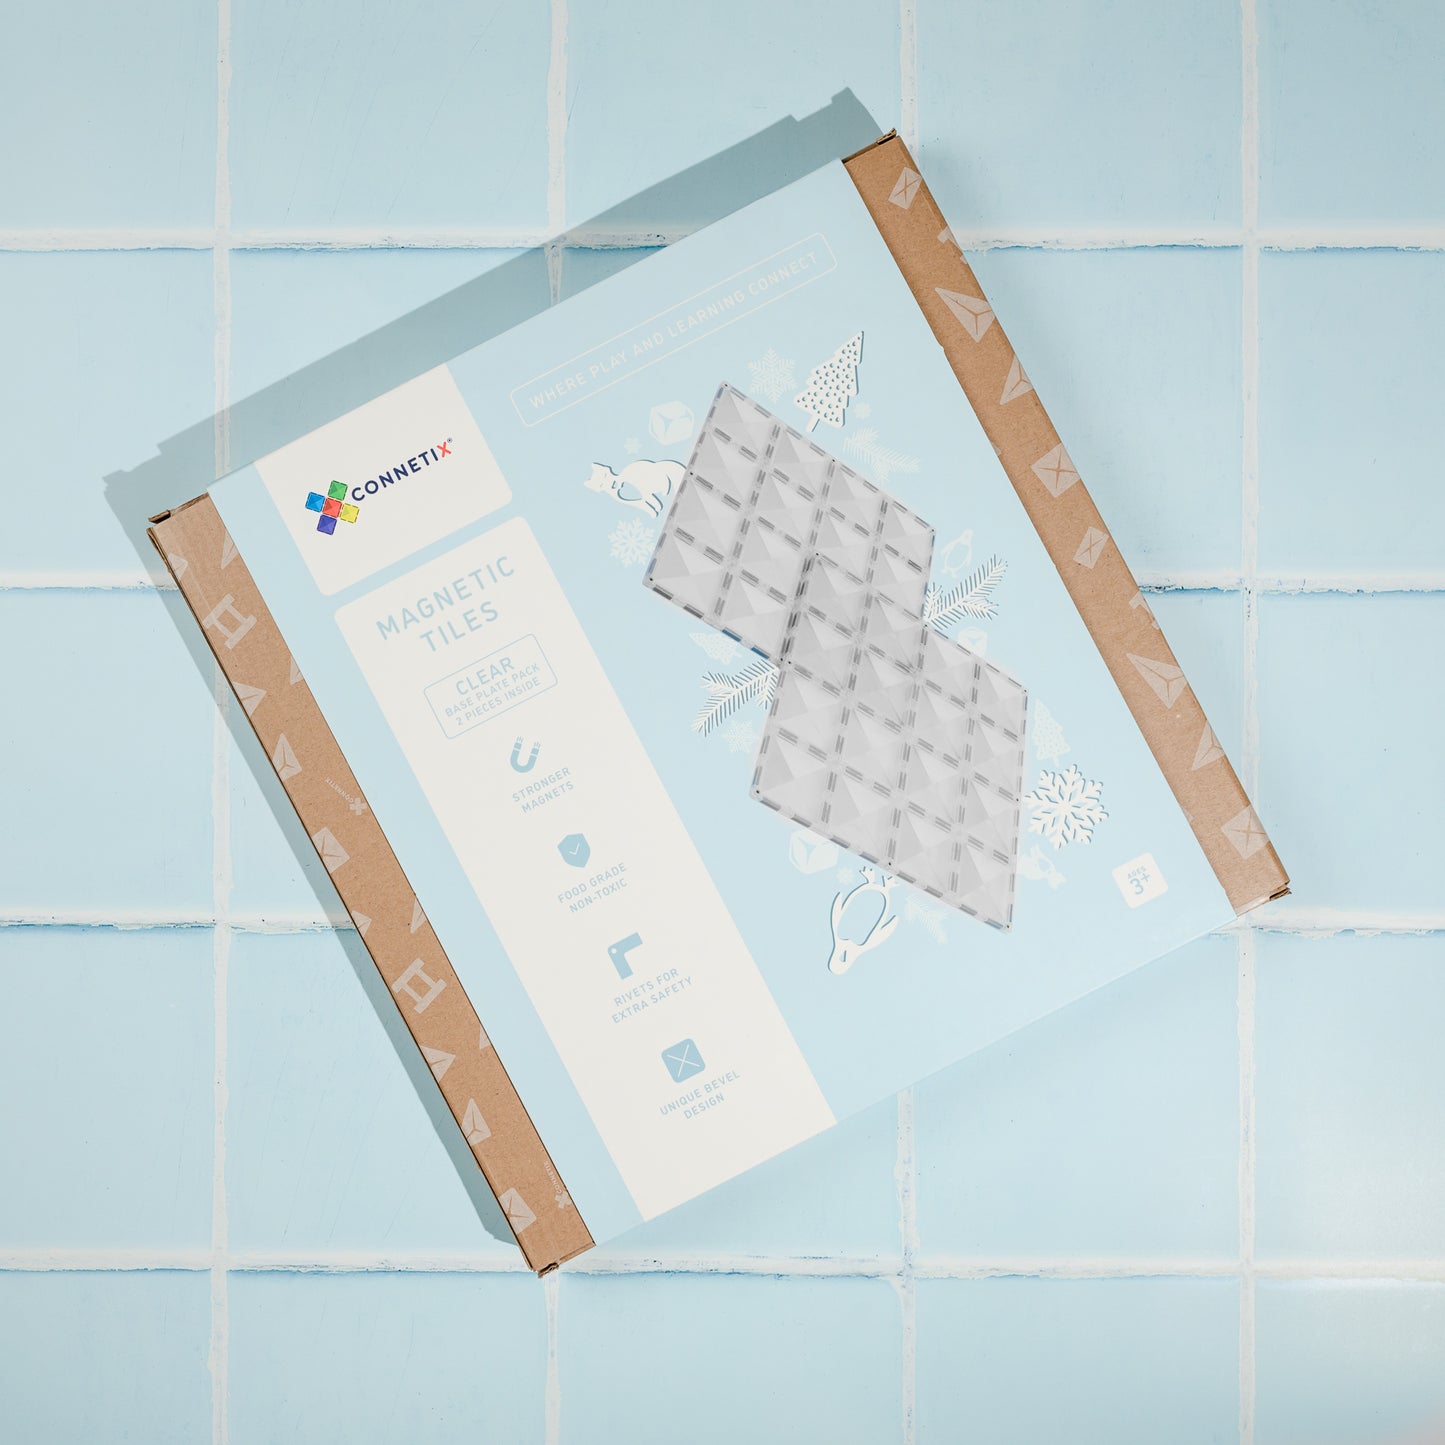 Connetix - 2 Piece Clear Base Plate Pack Magnetic Tiles